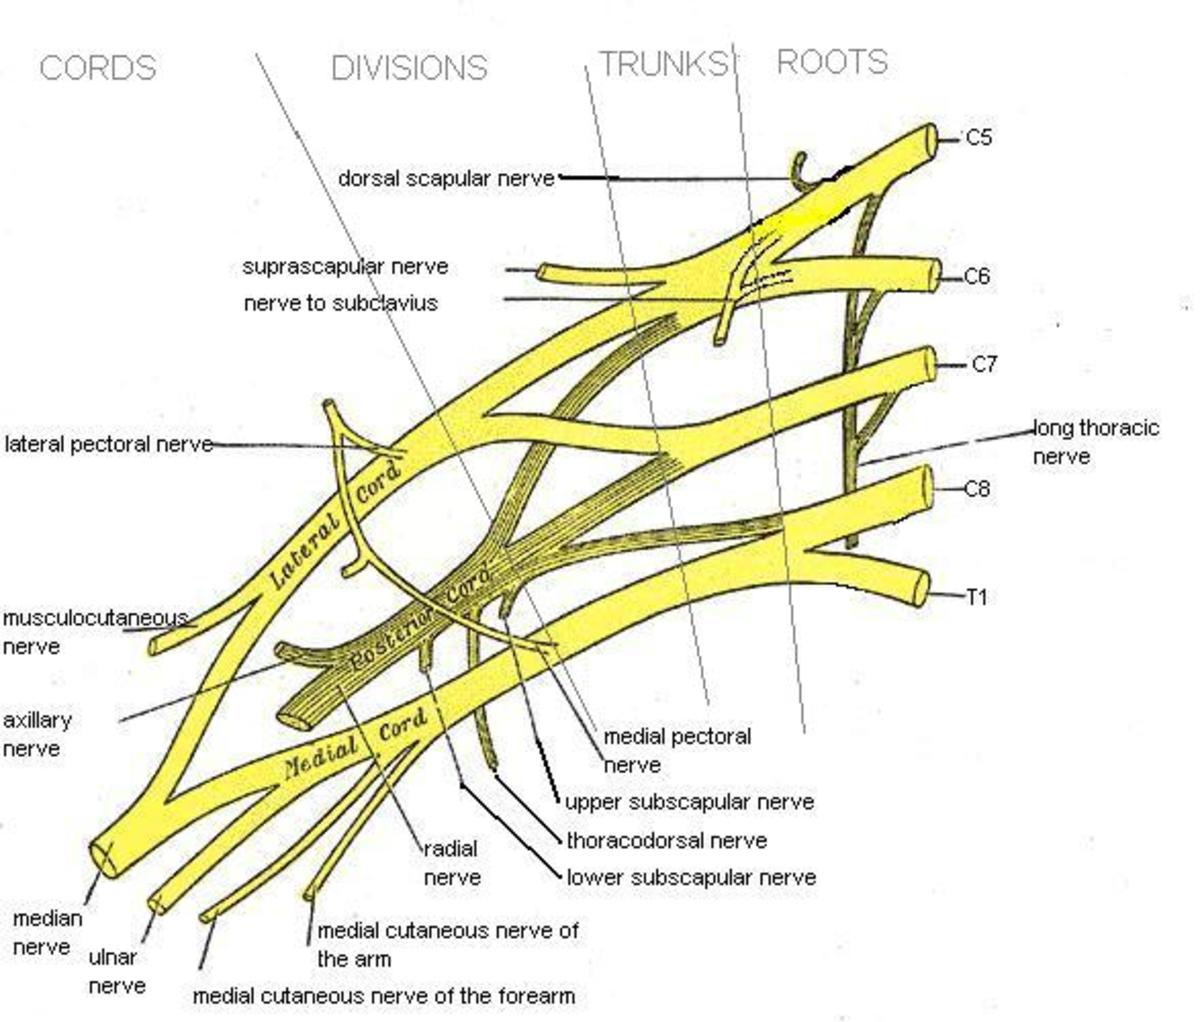 Diagram showing the brachial plexus. Note the combinations and divisions that end up becoming the nerves of the shoulder, arm and hand. 